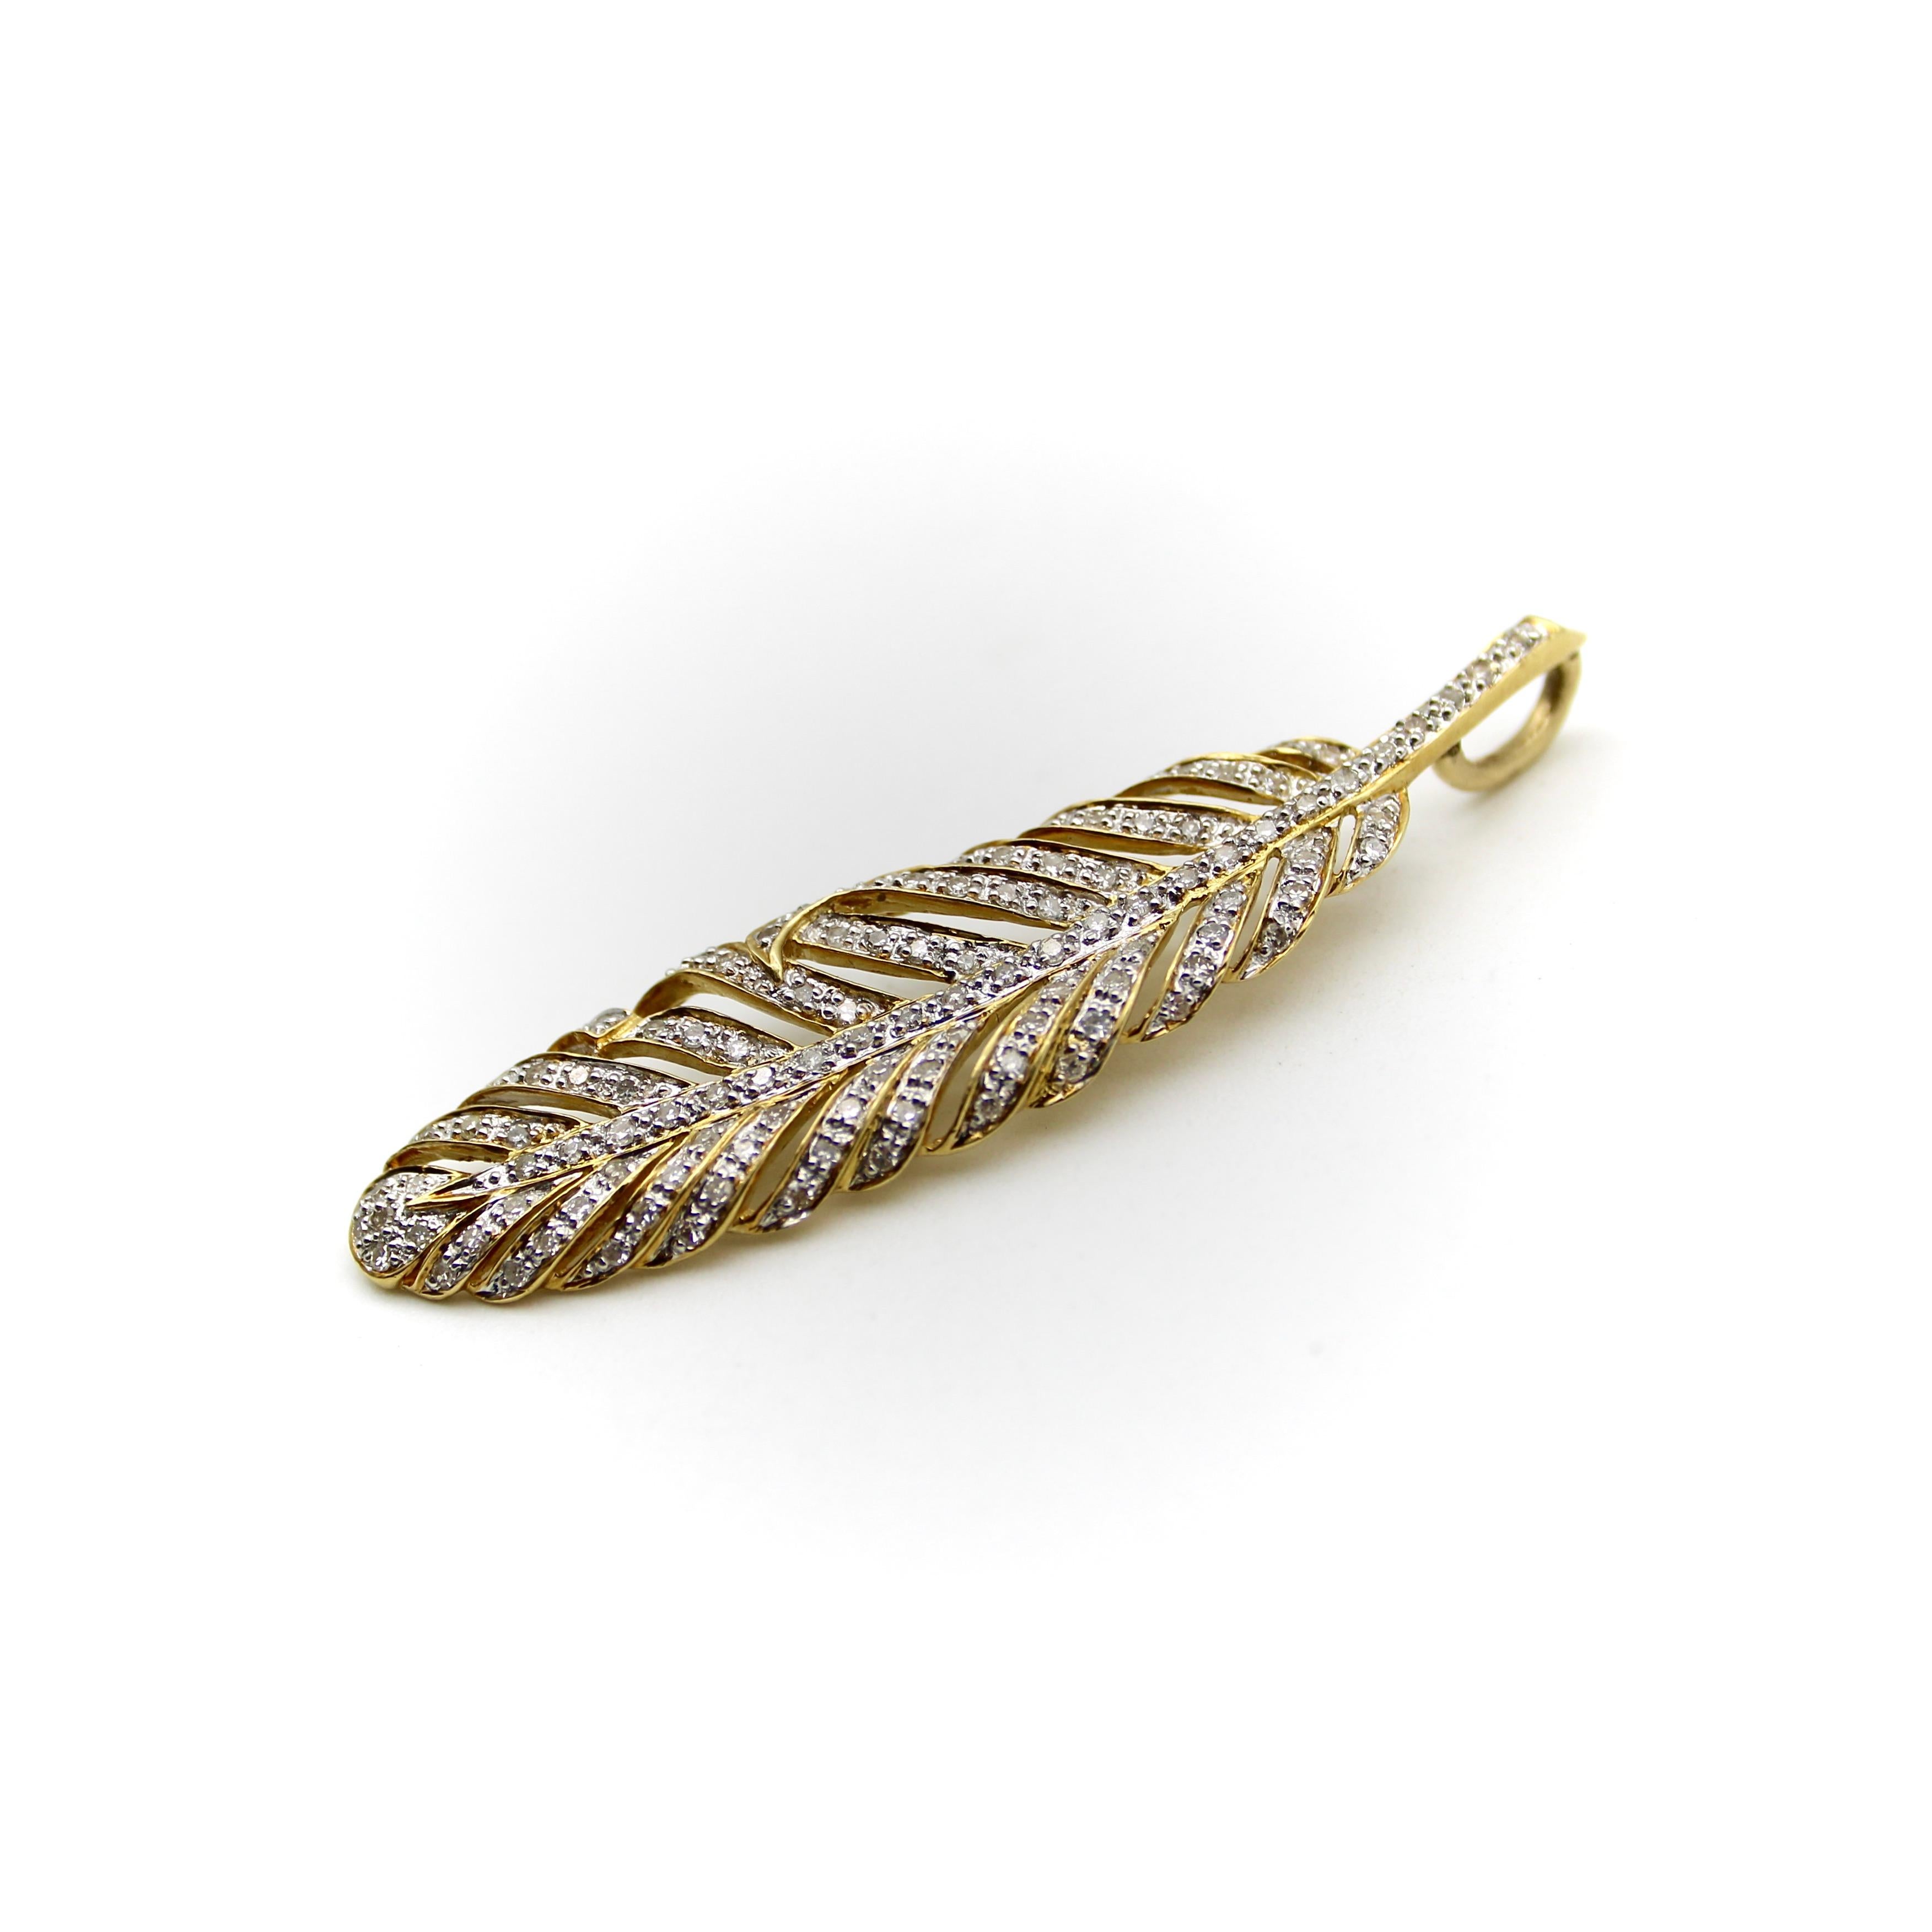 This vintage 18k gold feather pendant is covered in 116 micro-pave diamonds that shimmer in the light. The feather is cut with charming detail, each wisp is separate from the body of the pendant, reticulated to give the feather a light and airy